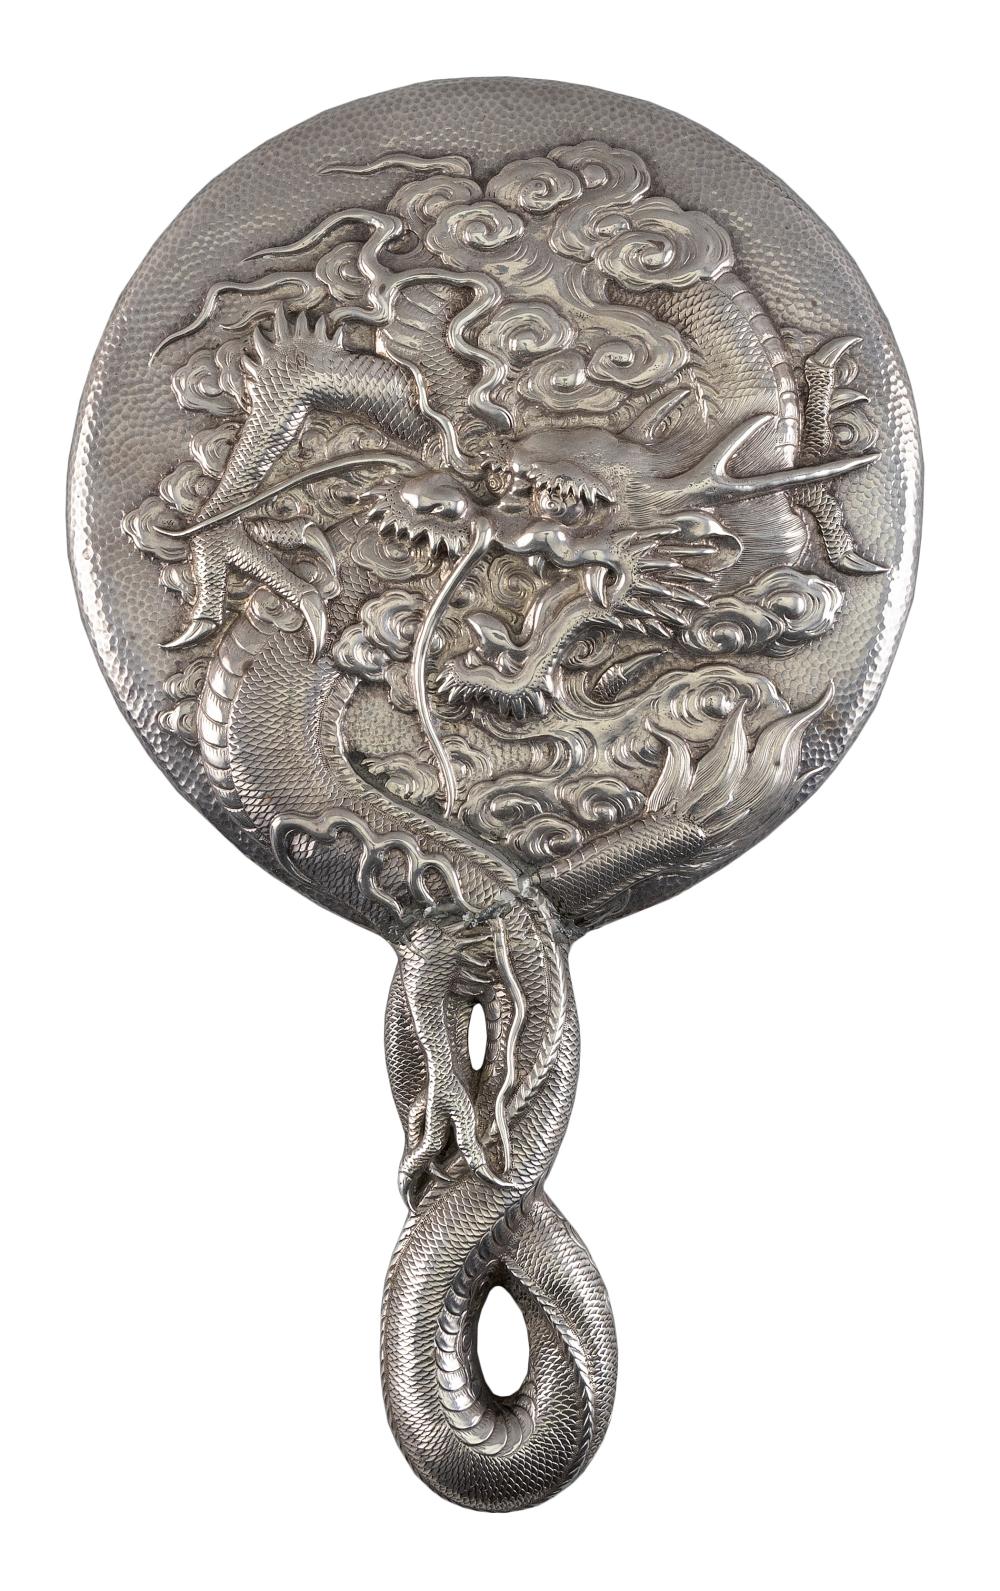 CHINESE EXPORT SILVER HAND MIRROR